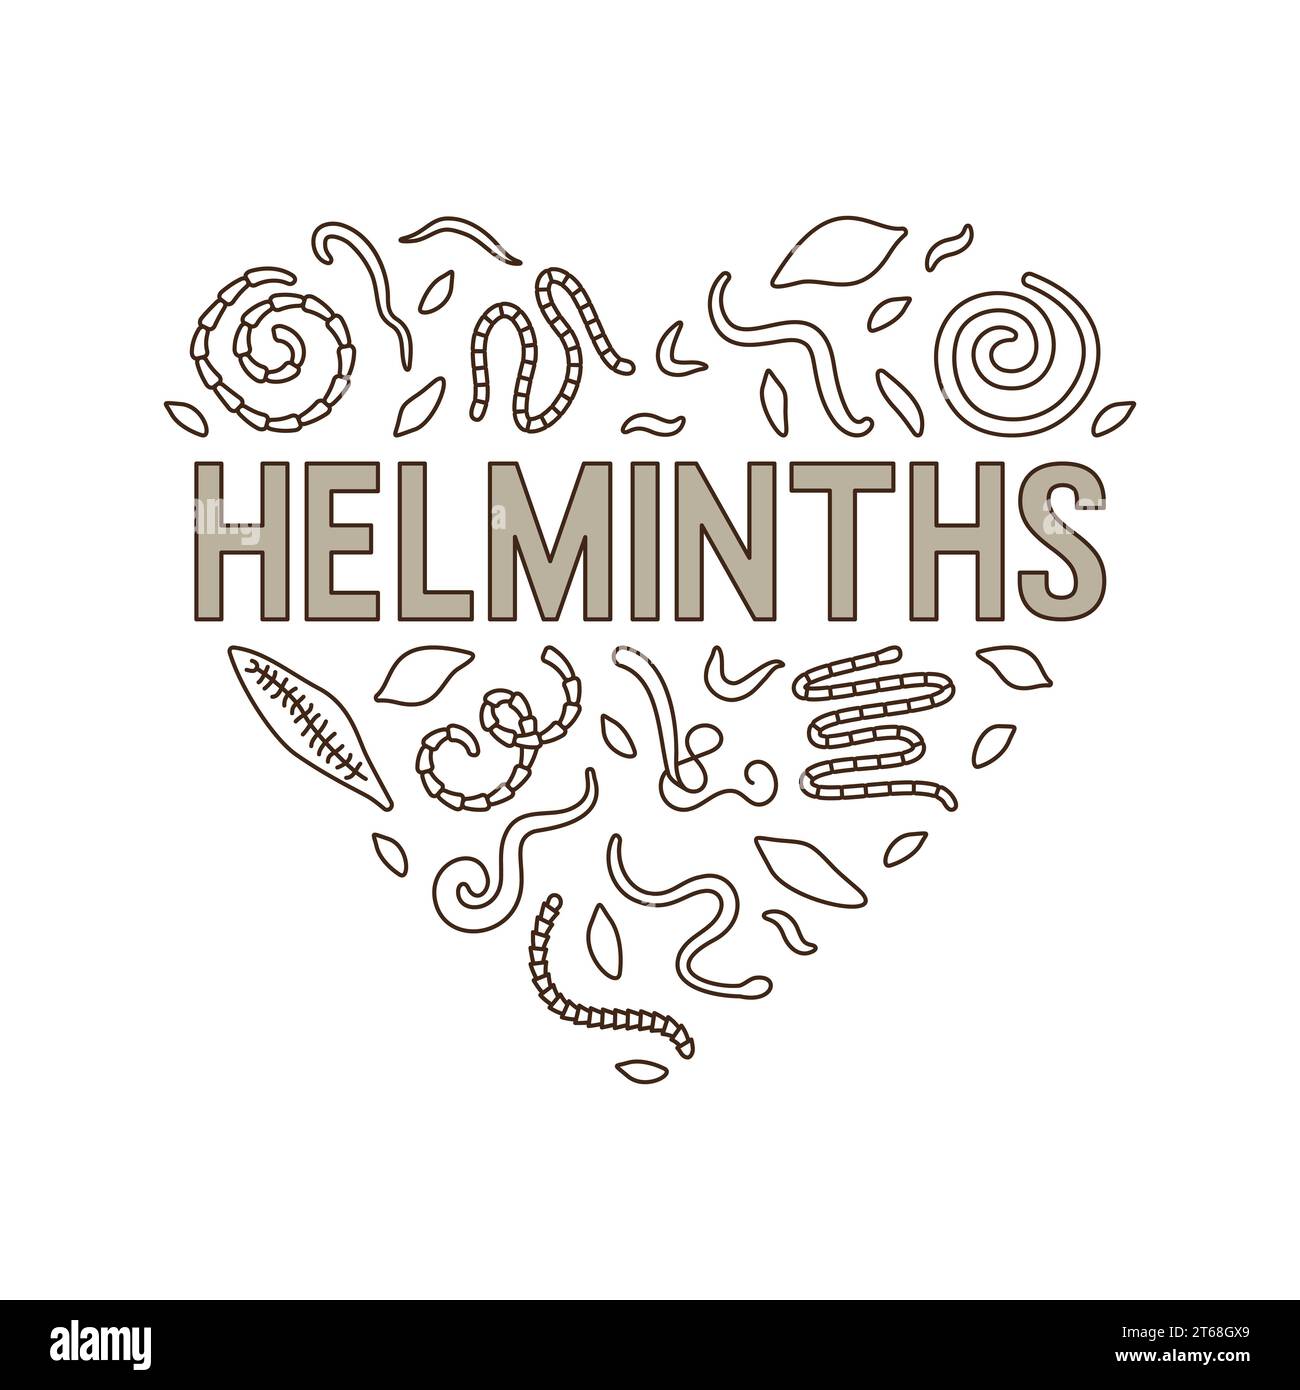 Parasitic worms - Helminths vector concept heart-shaped illustration. Banner in heart shape with Helminth outline icons Stock Vector